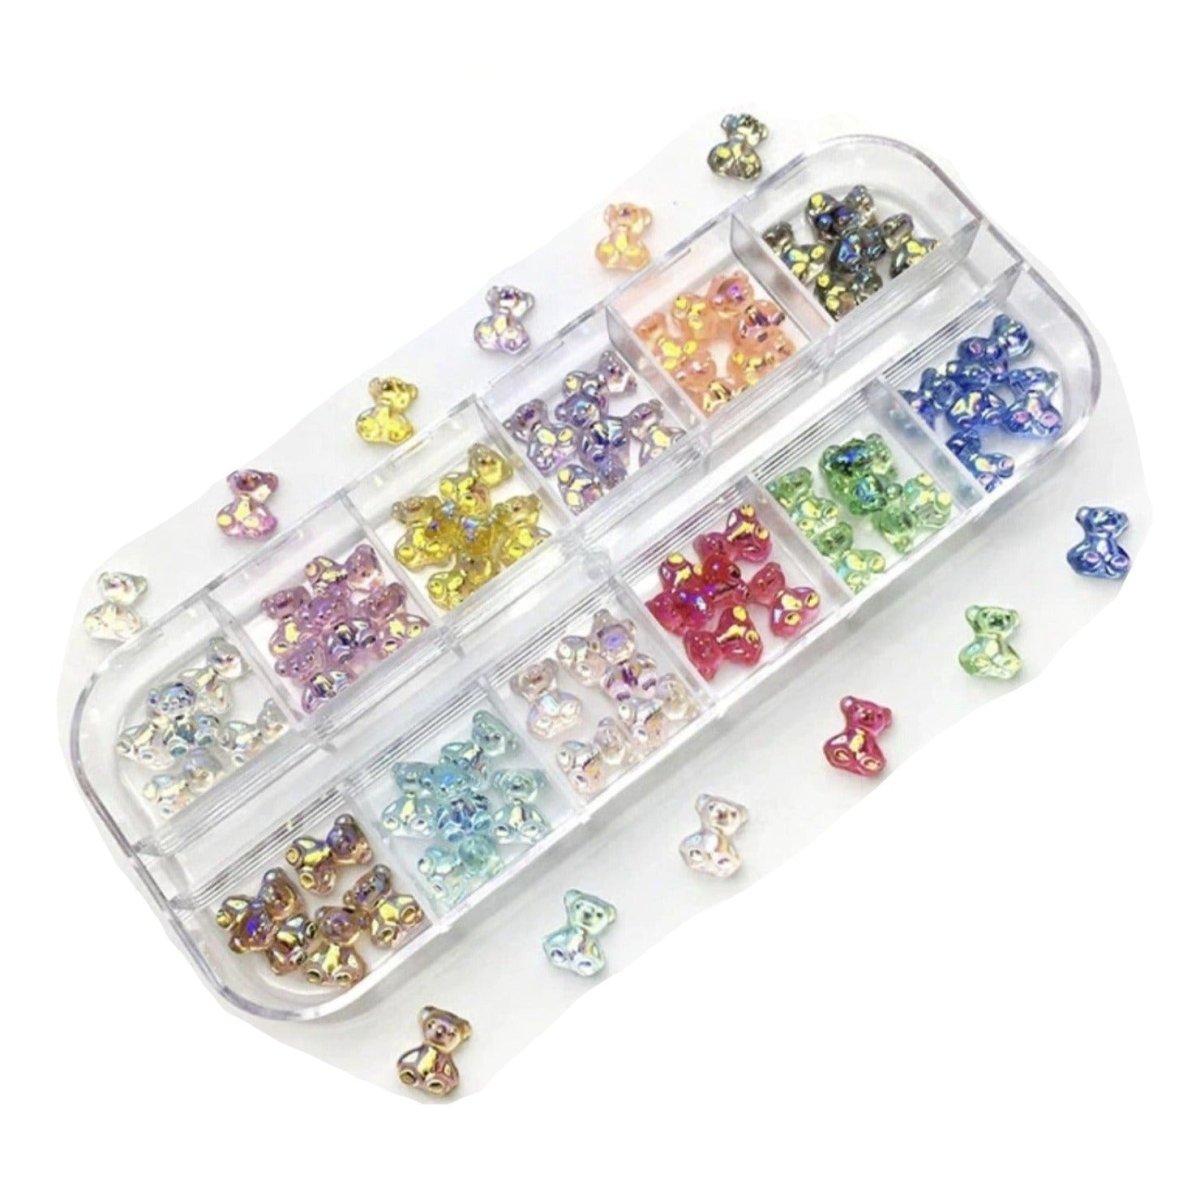 1 Box Teddy 3D Nail Art Sequins Decorations Accessories Mixer Colours 60pcs Set Charms - Asia Sell